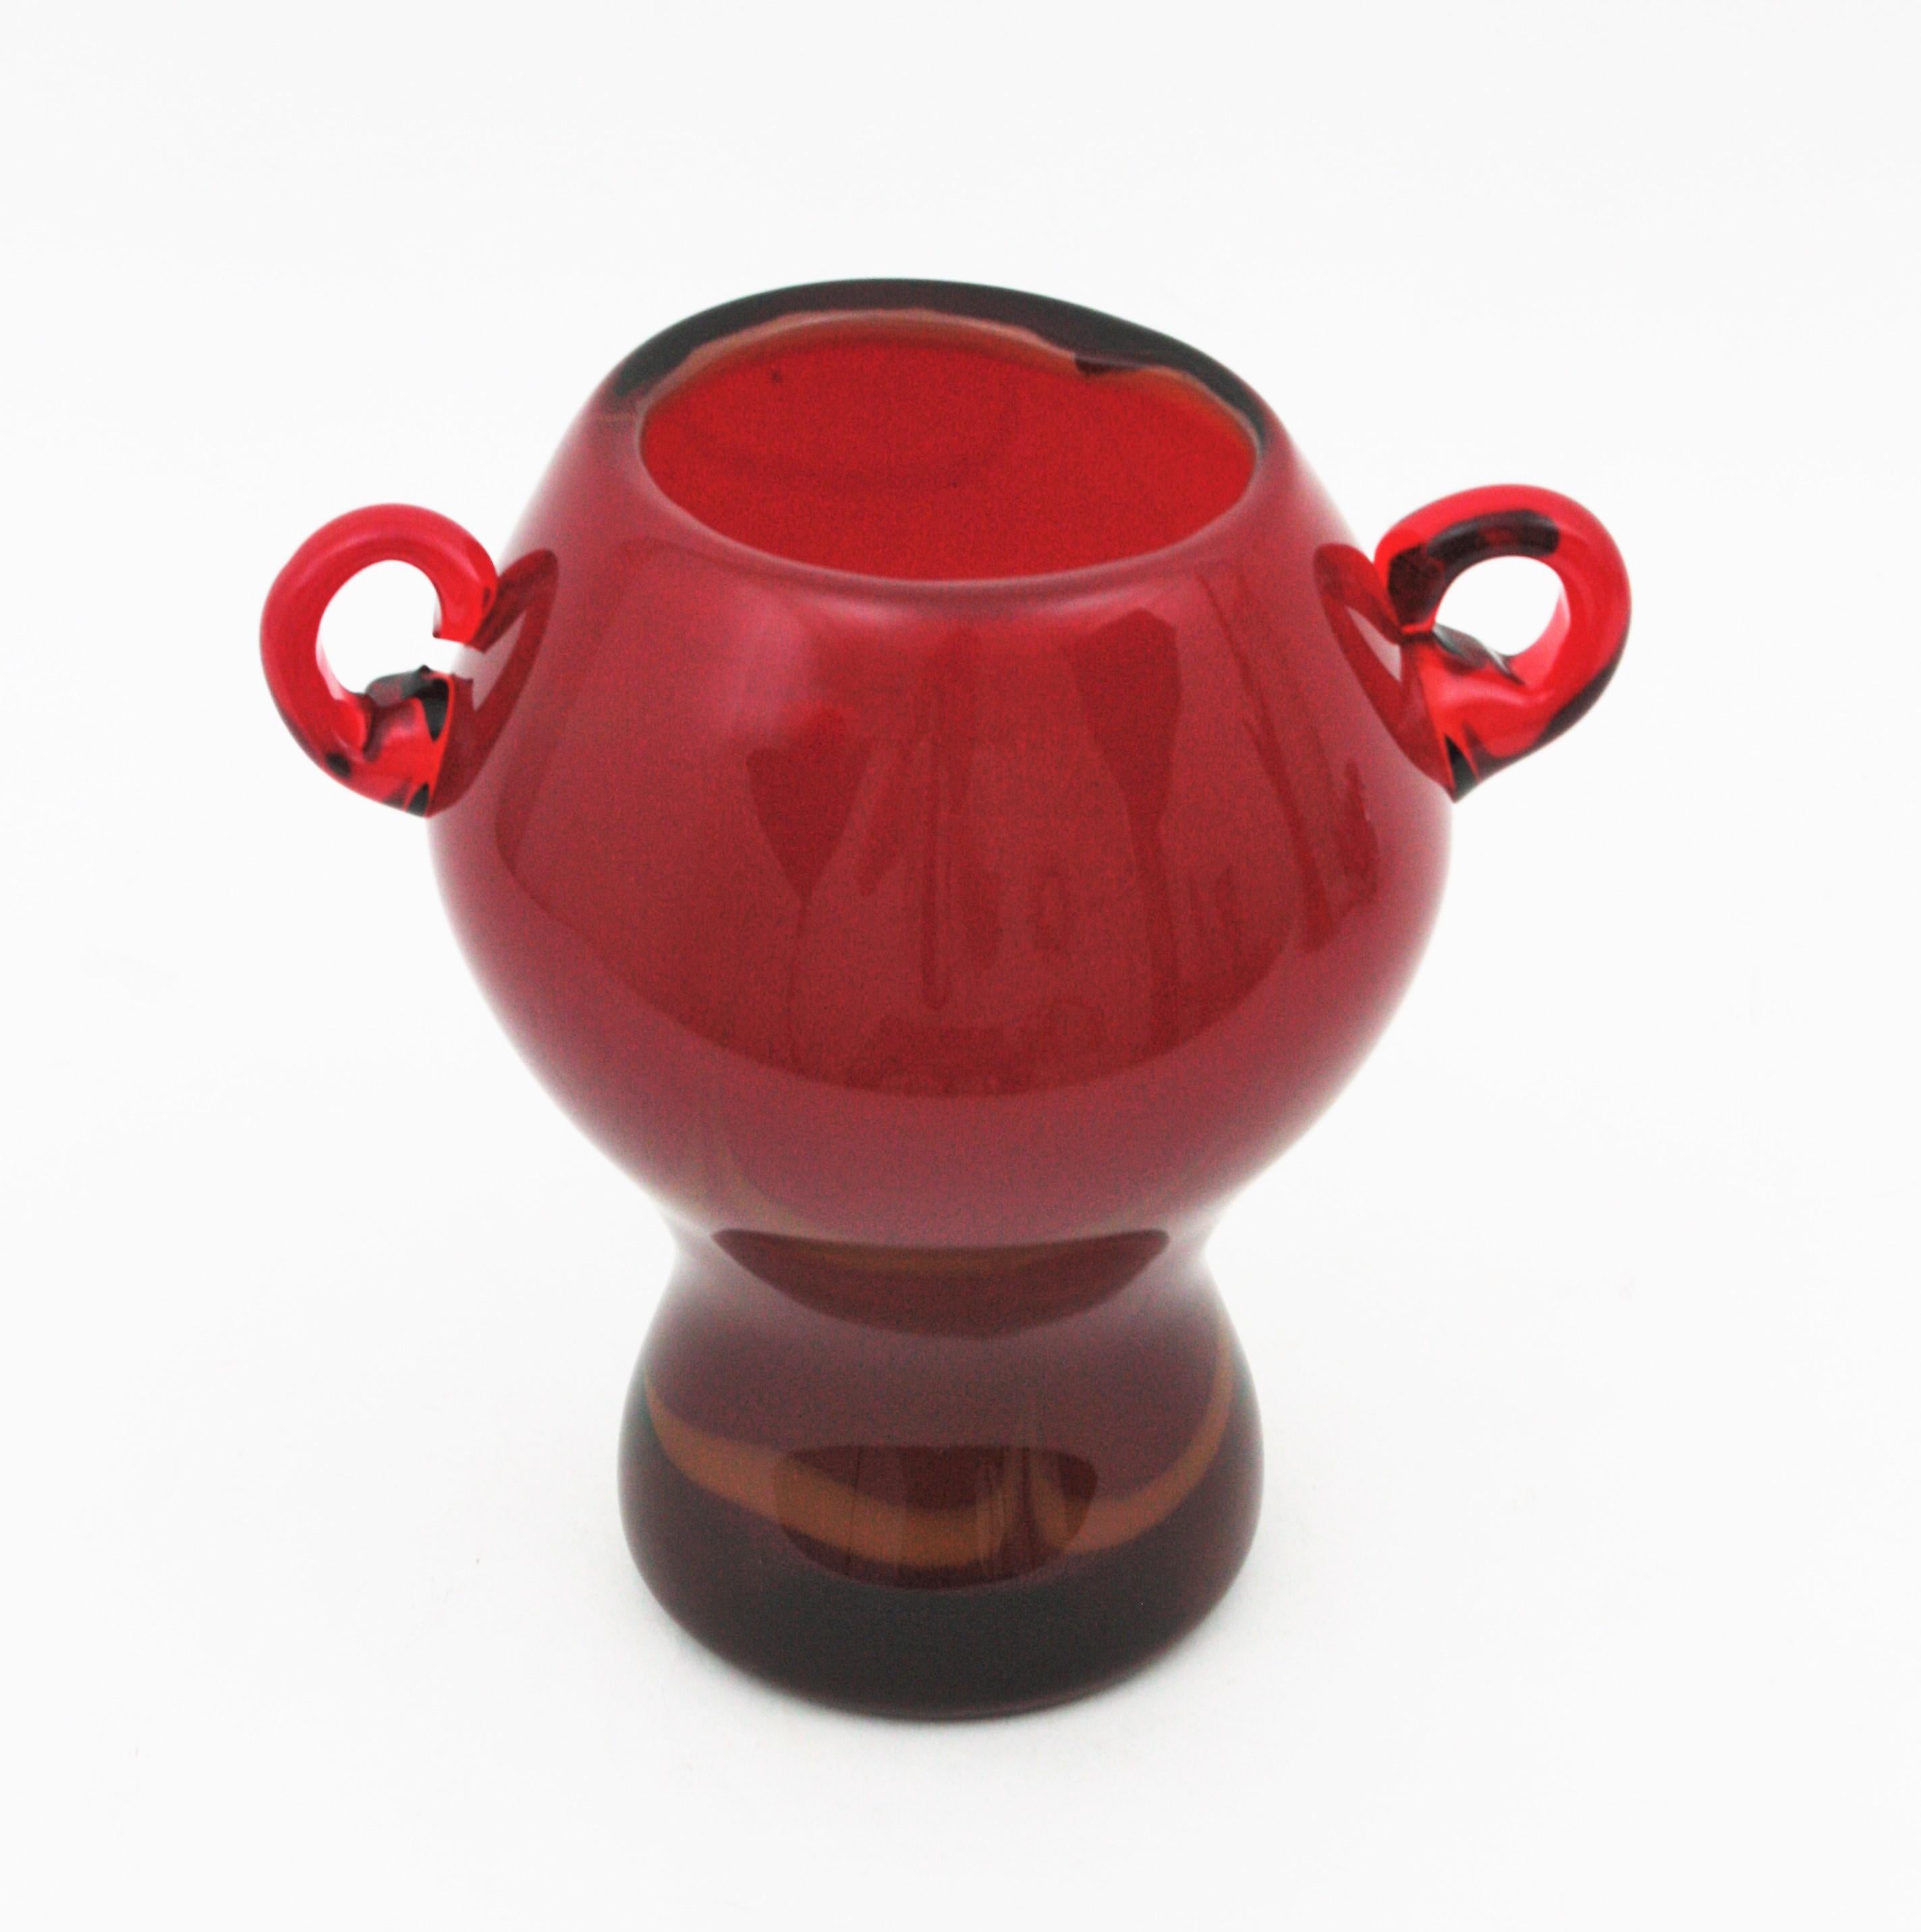 Hand-Crafted Archimede Seguso Red Toffee Art Glass Vase with Handles, Italy, 1950s For Sale